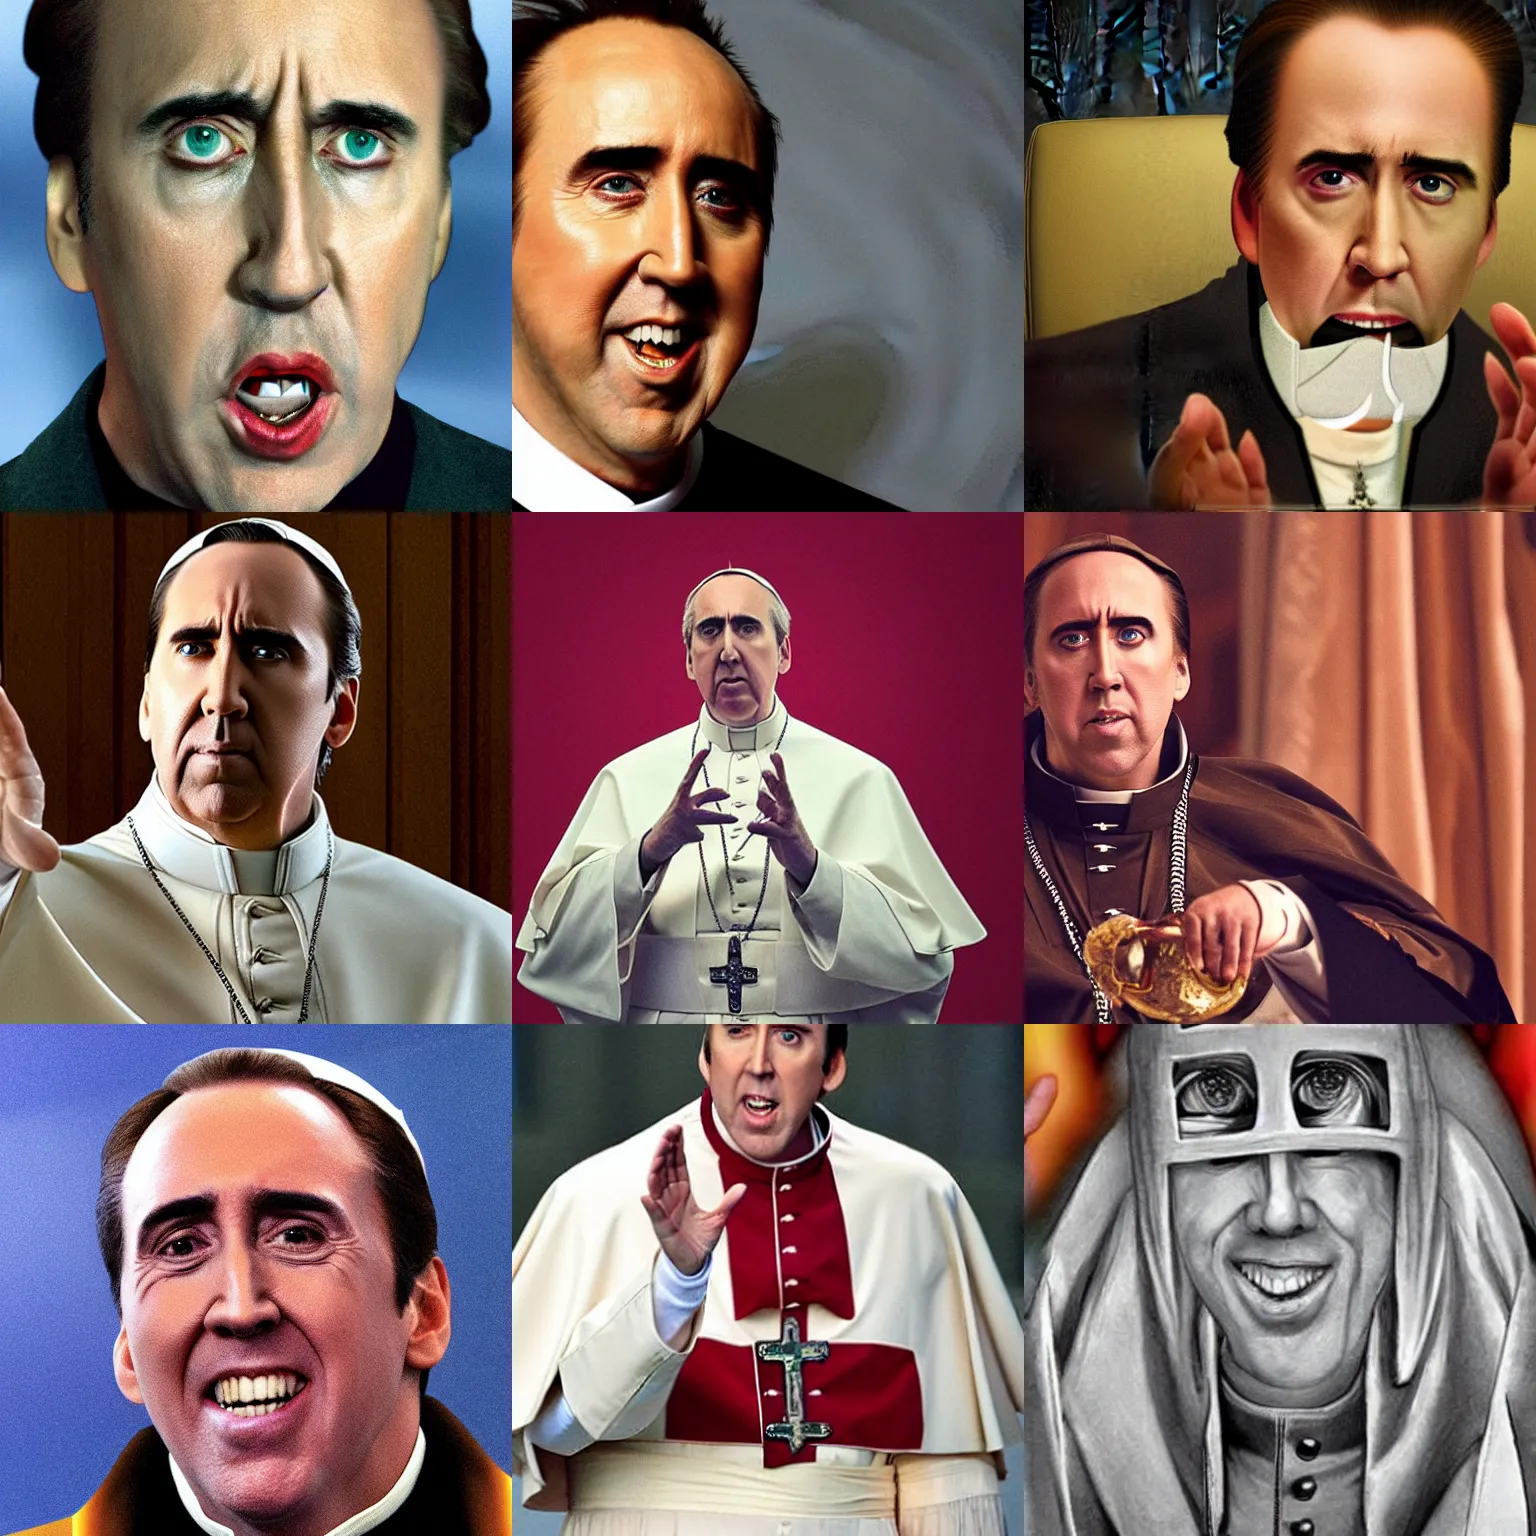 Prompt: Nicholas Cage as the Pope, secretly an extraterrestrial alien, photograph